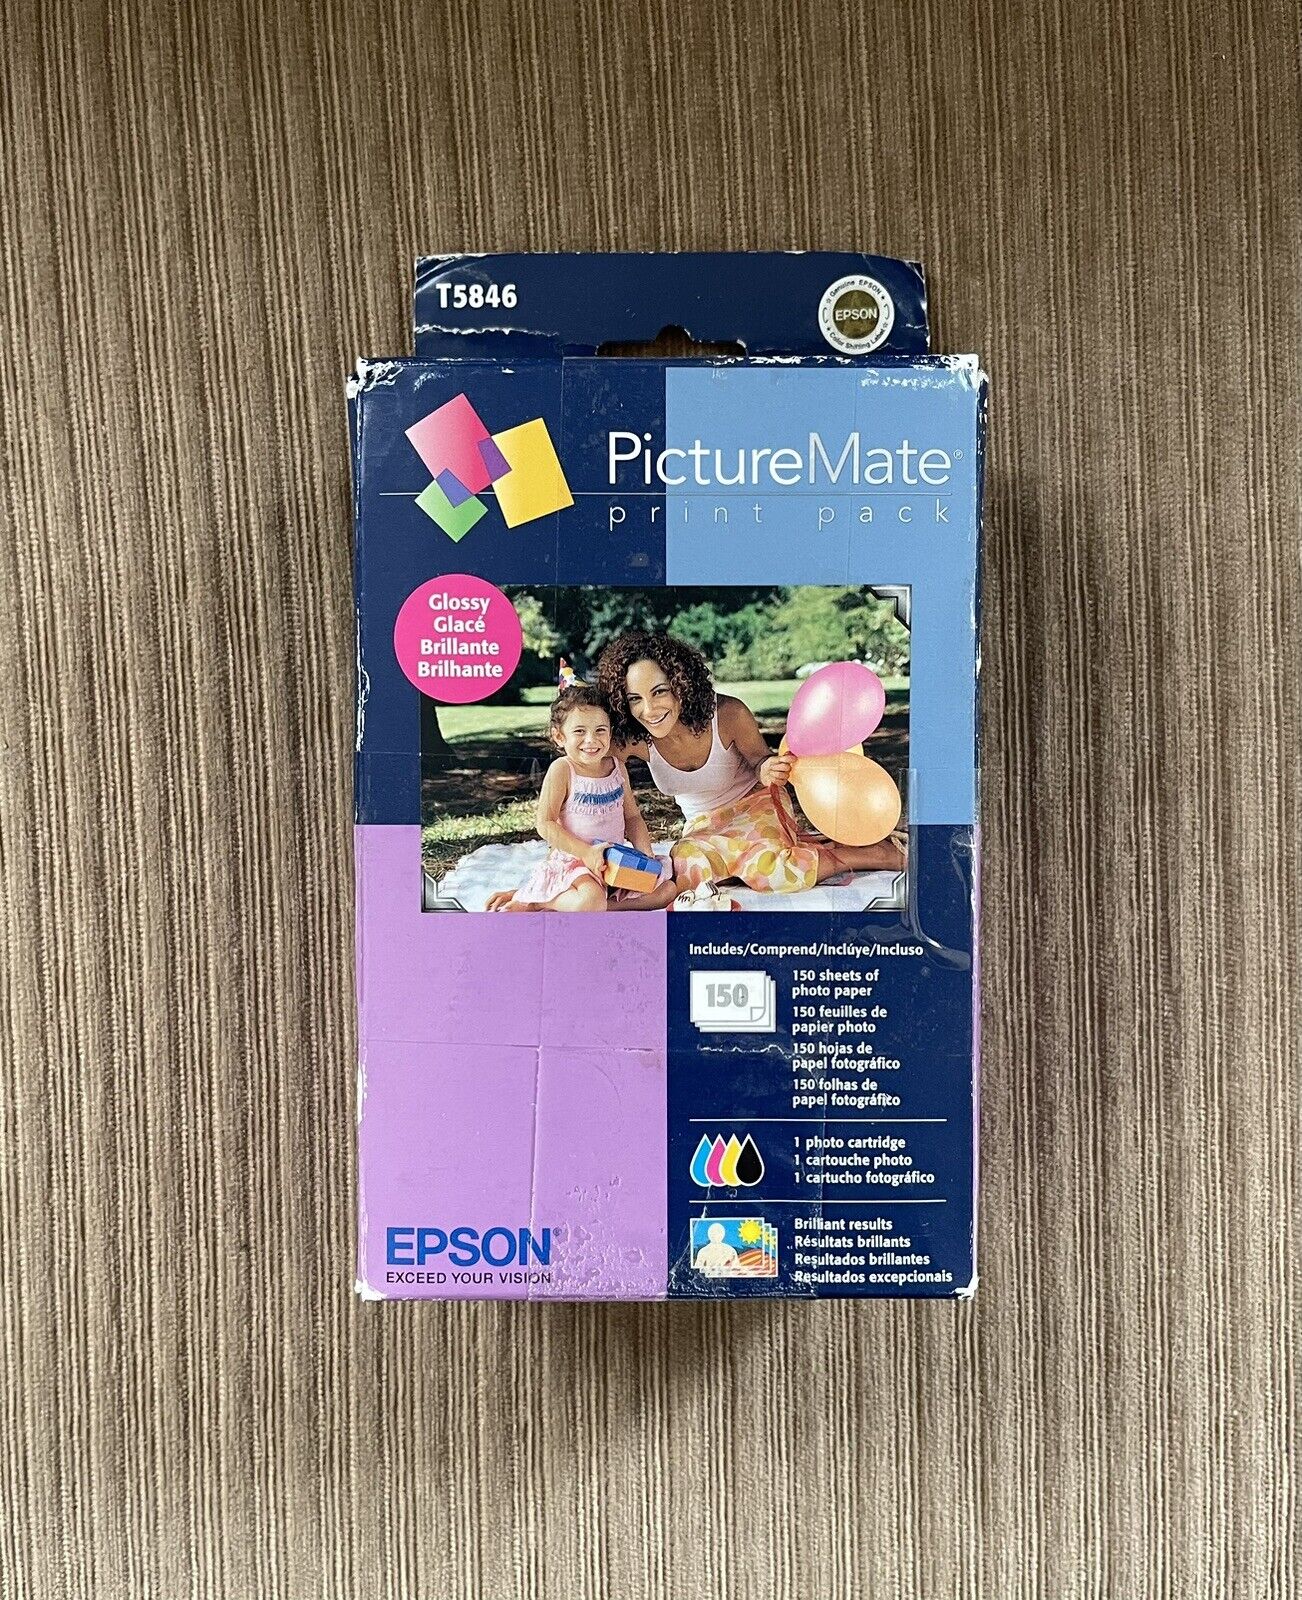 Epson T5846 Picture Mate Print Pack 4x6 150 Sheet Brand New Sealed Exp 12/2012